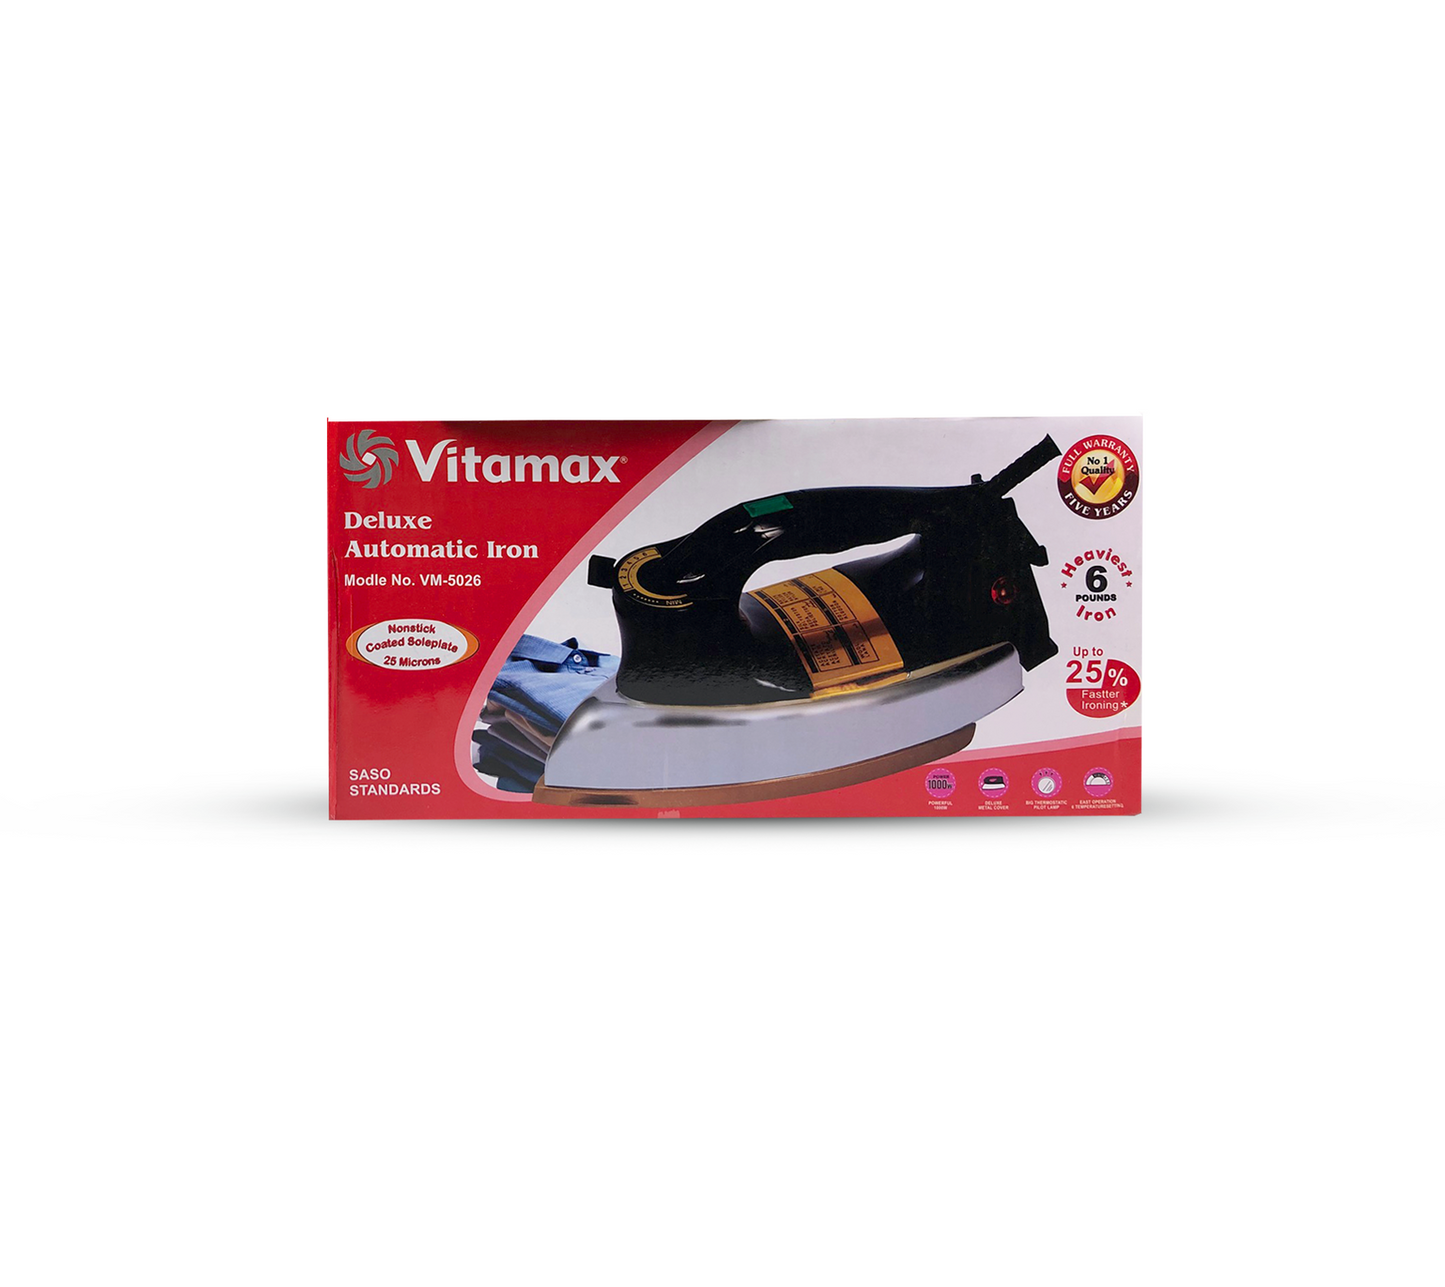 Deluxe Automatic Dry Iron VM-5026